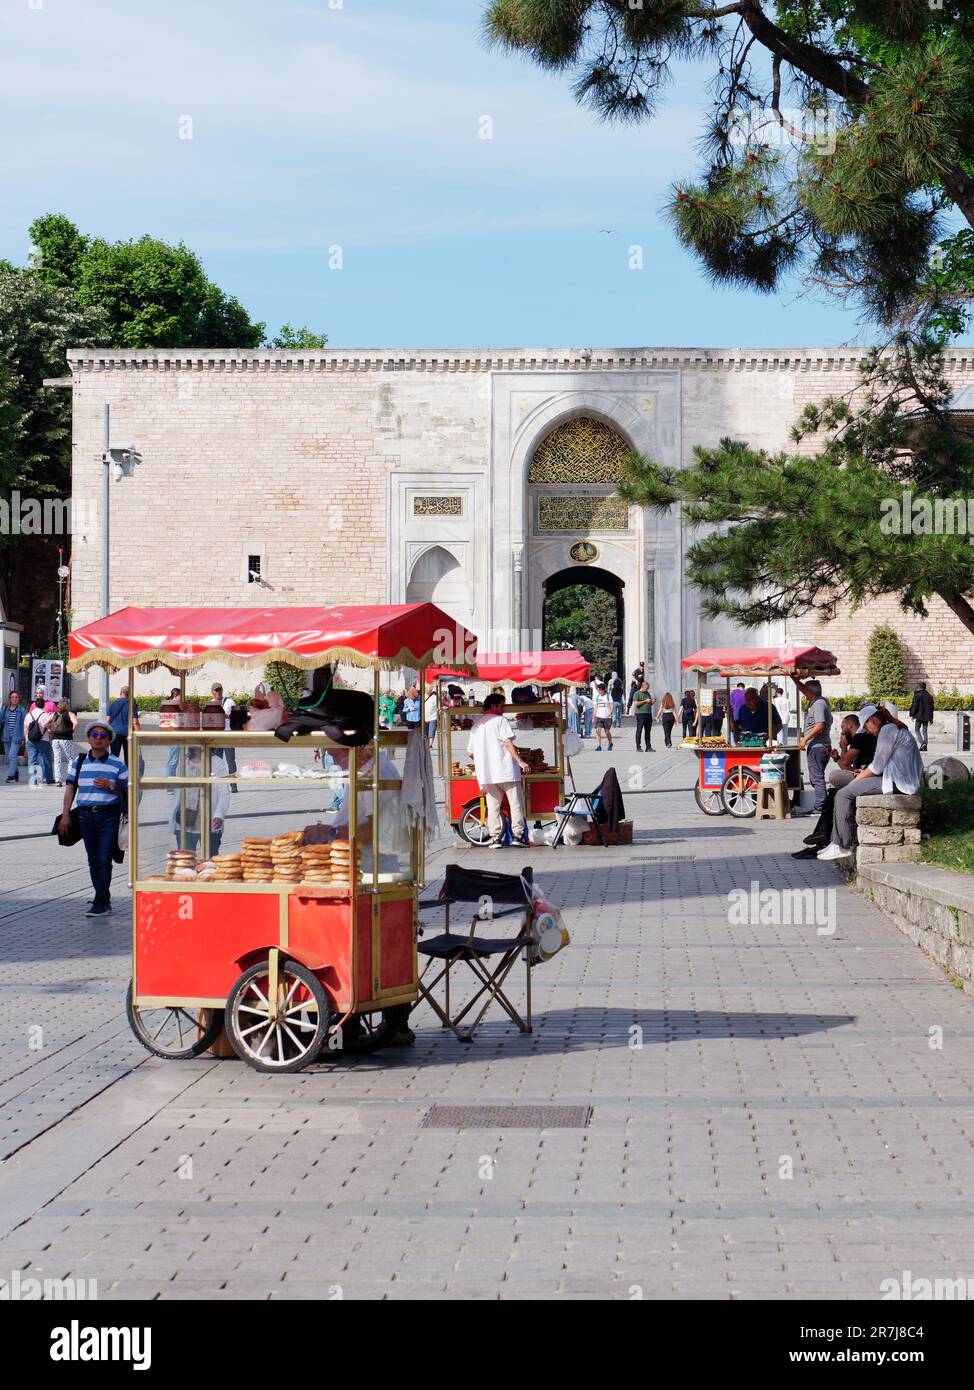 Red carts with simits (Turkish Bagels) outside the Imperial Gate, the outer most gate of the Topkapi Palace historic Ottoman complex, Istanbul, Turkey. Stock Photo